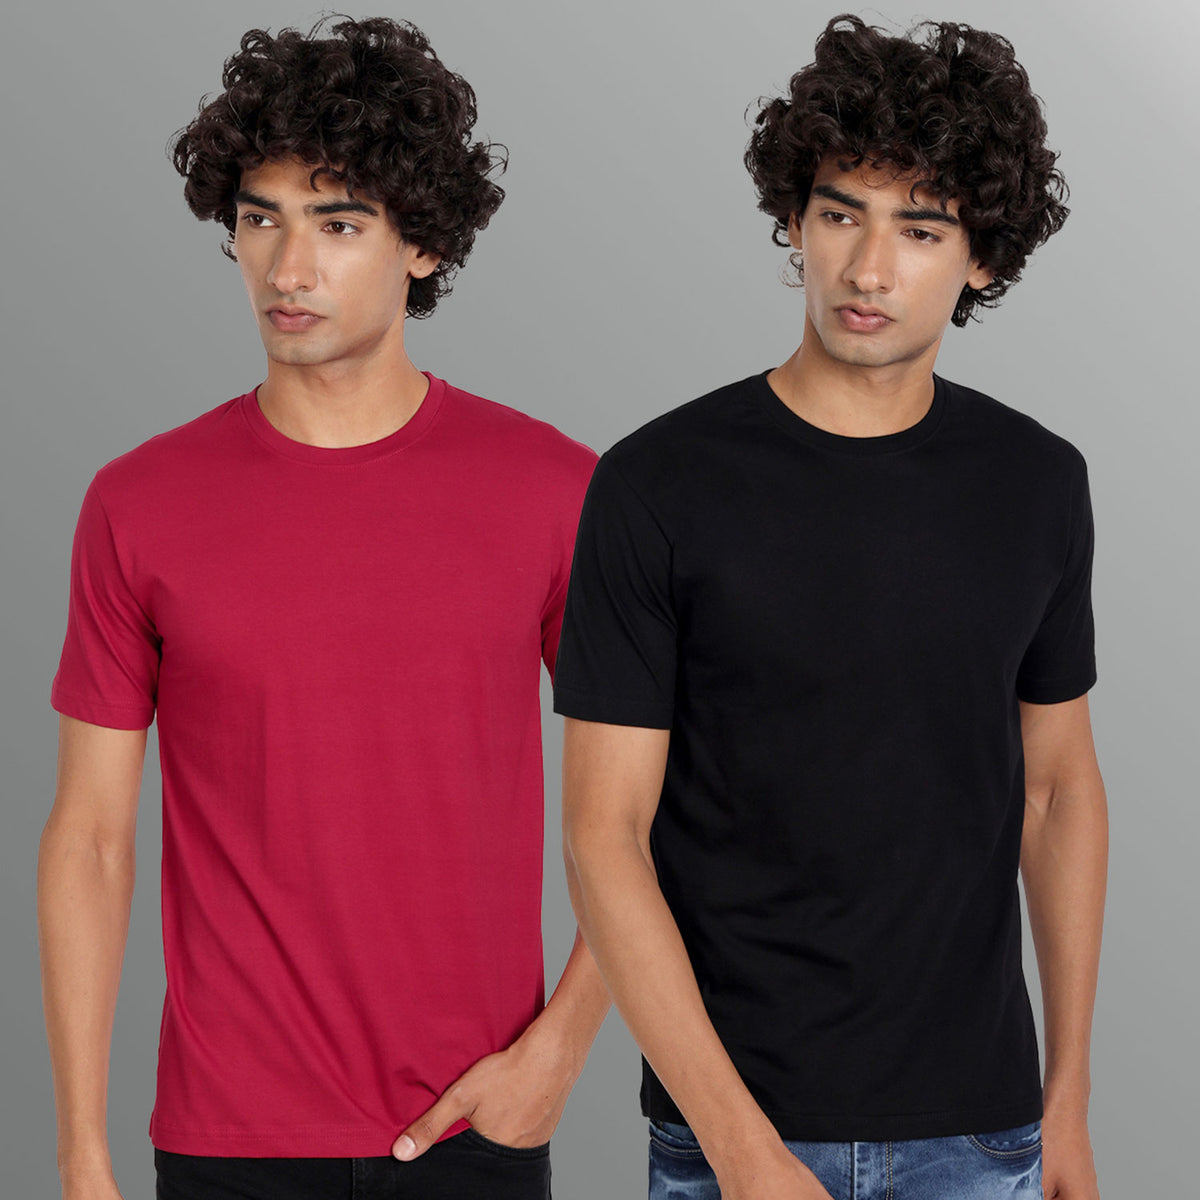 Half Sleeve maroon and Black T-shirt Combo For Men